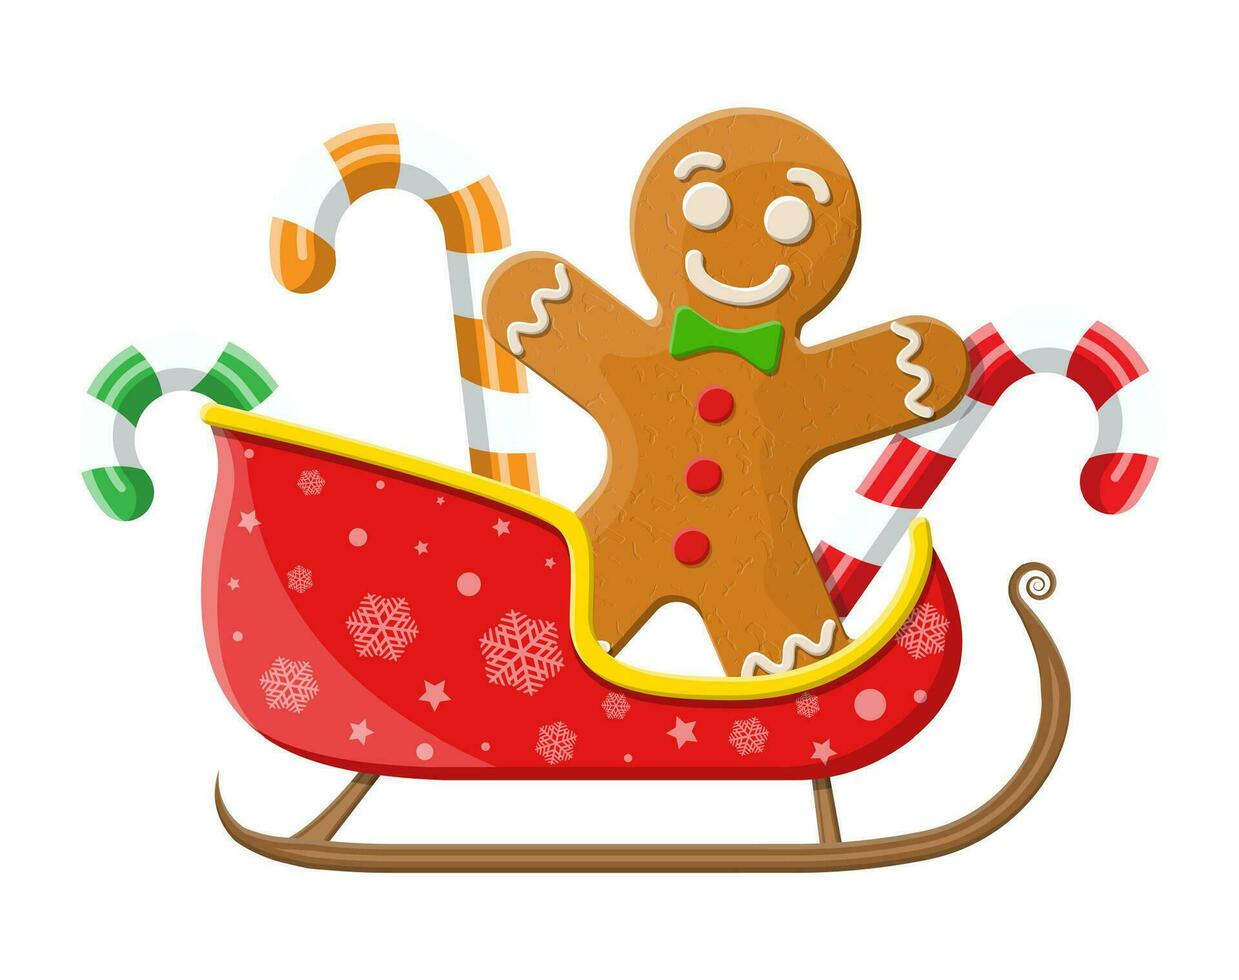 Holiday gingerbread man cookie and candycane in santa sleigh. Cookie in shape of man with colored icing. Merry christmas holiday. New year xmas celebration. Vector illustration flat style